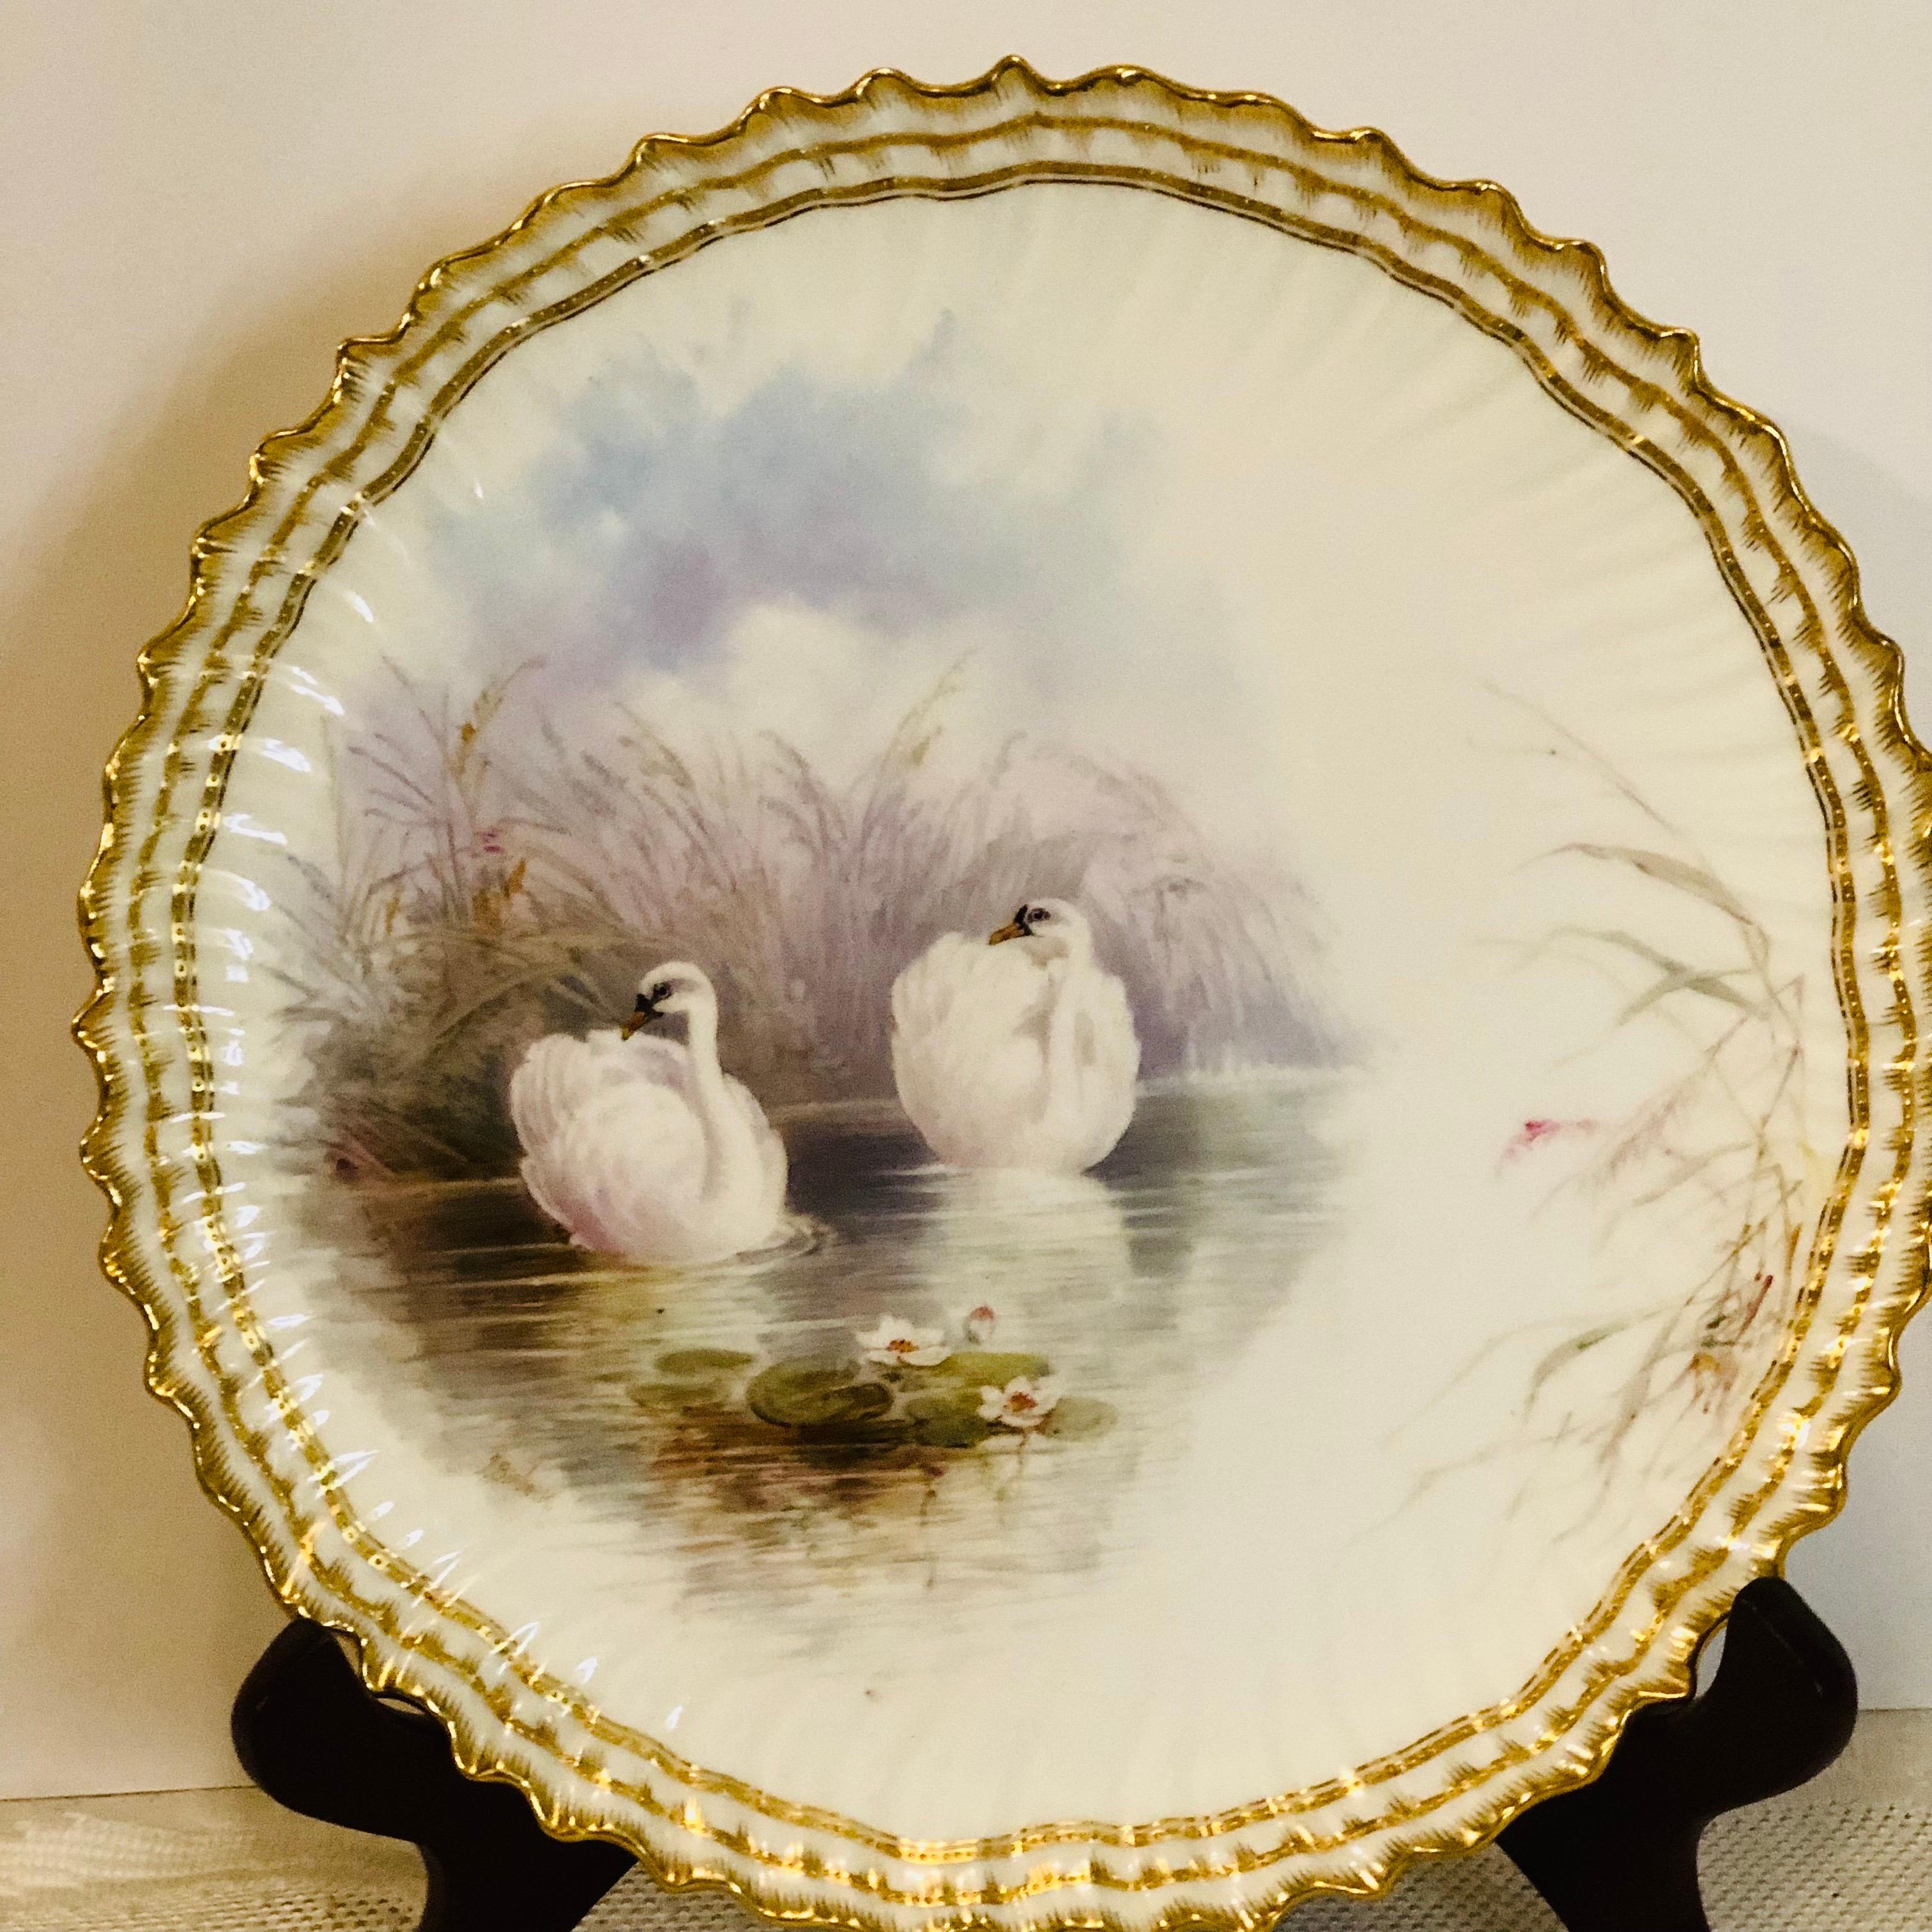 20th Century Set of 11 Cauldon Plates Each Painted Exquisitely With a Different Bird 